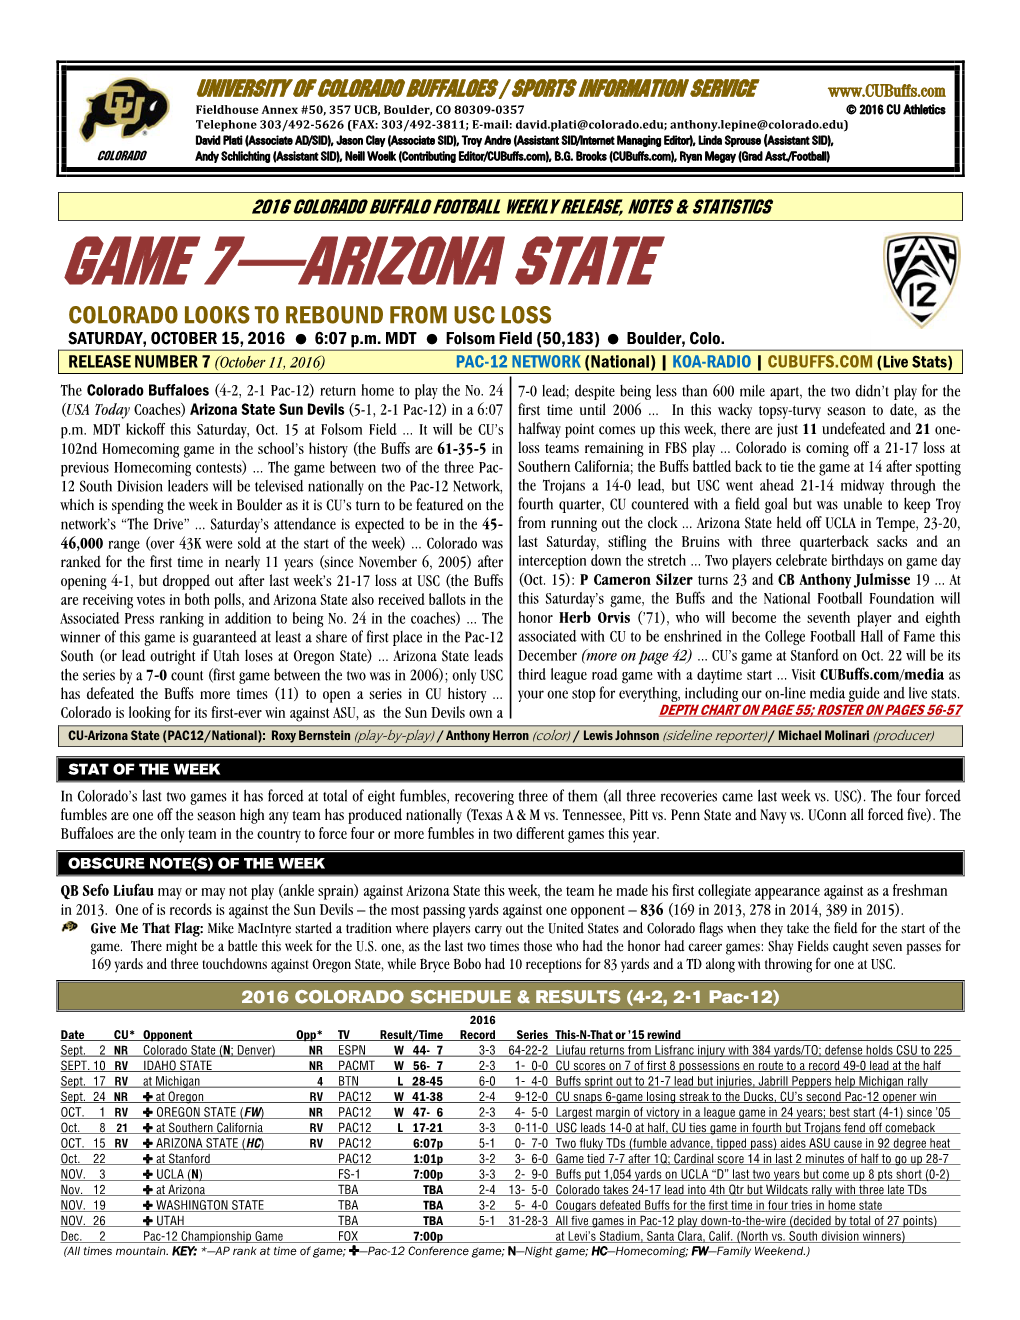 GAME 7—ARIZONA STATE COLORADO LOOKS to REBOUND from USC LOSS SATURDAY, OCTOBER 15, 2016 6:07 P.M